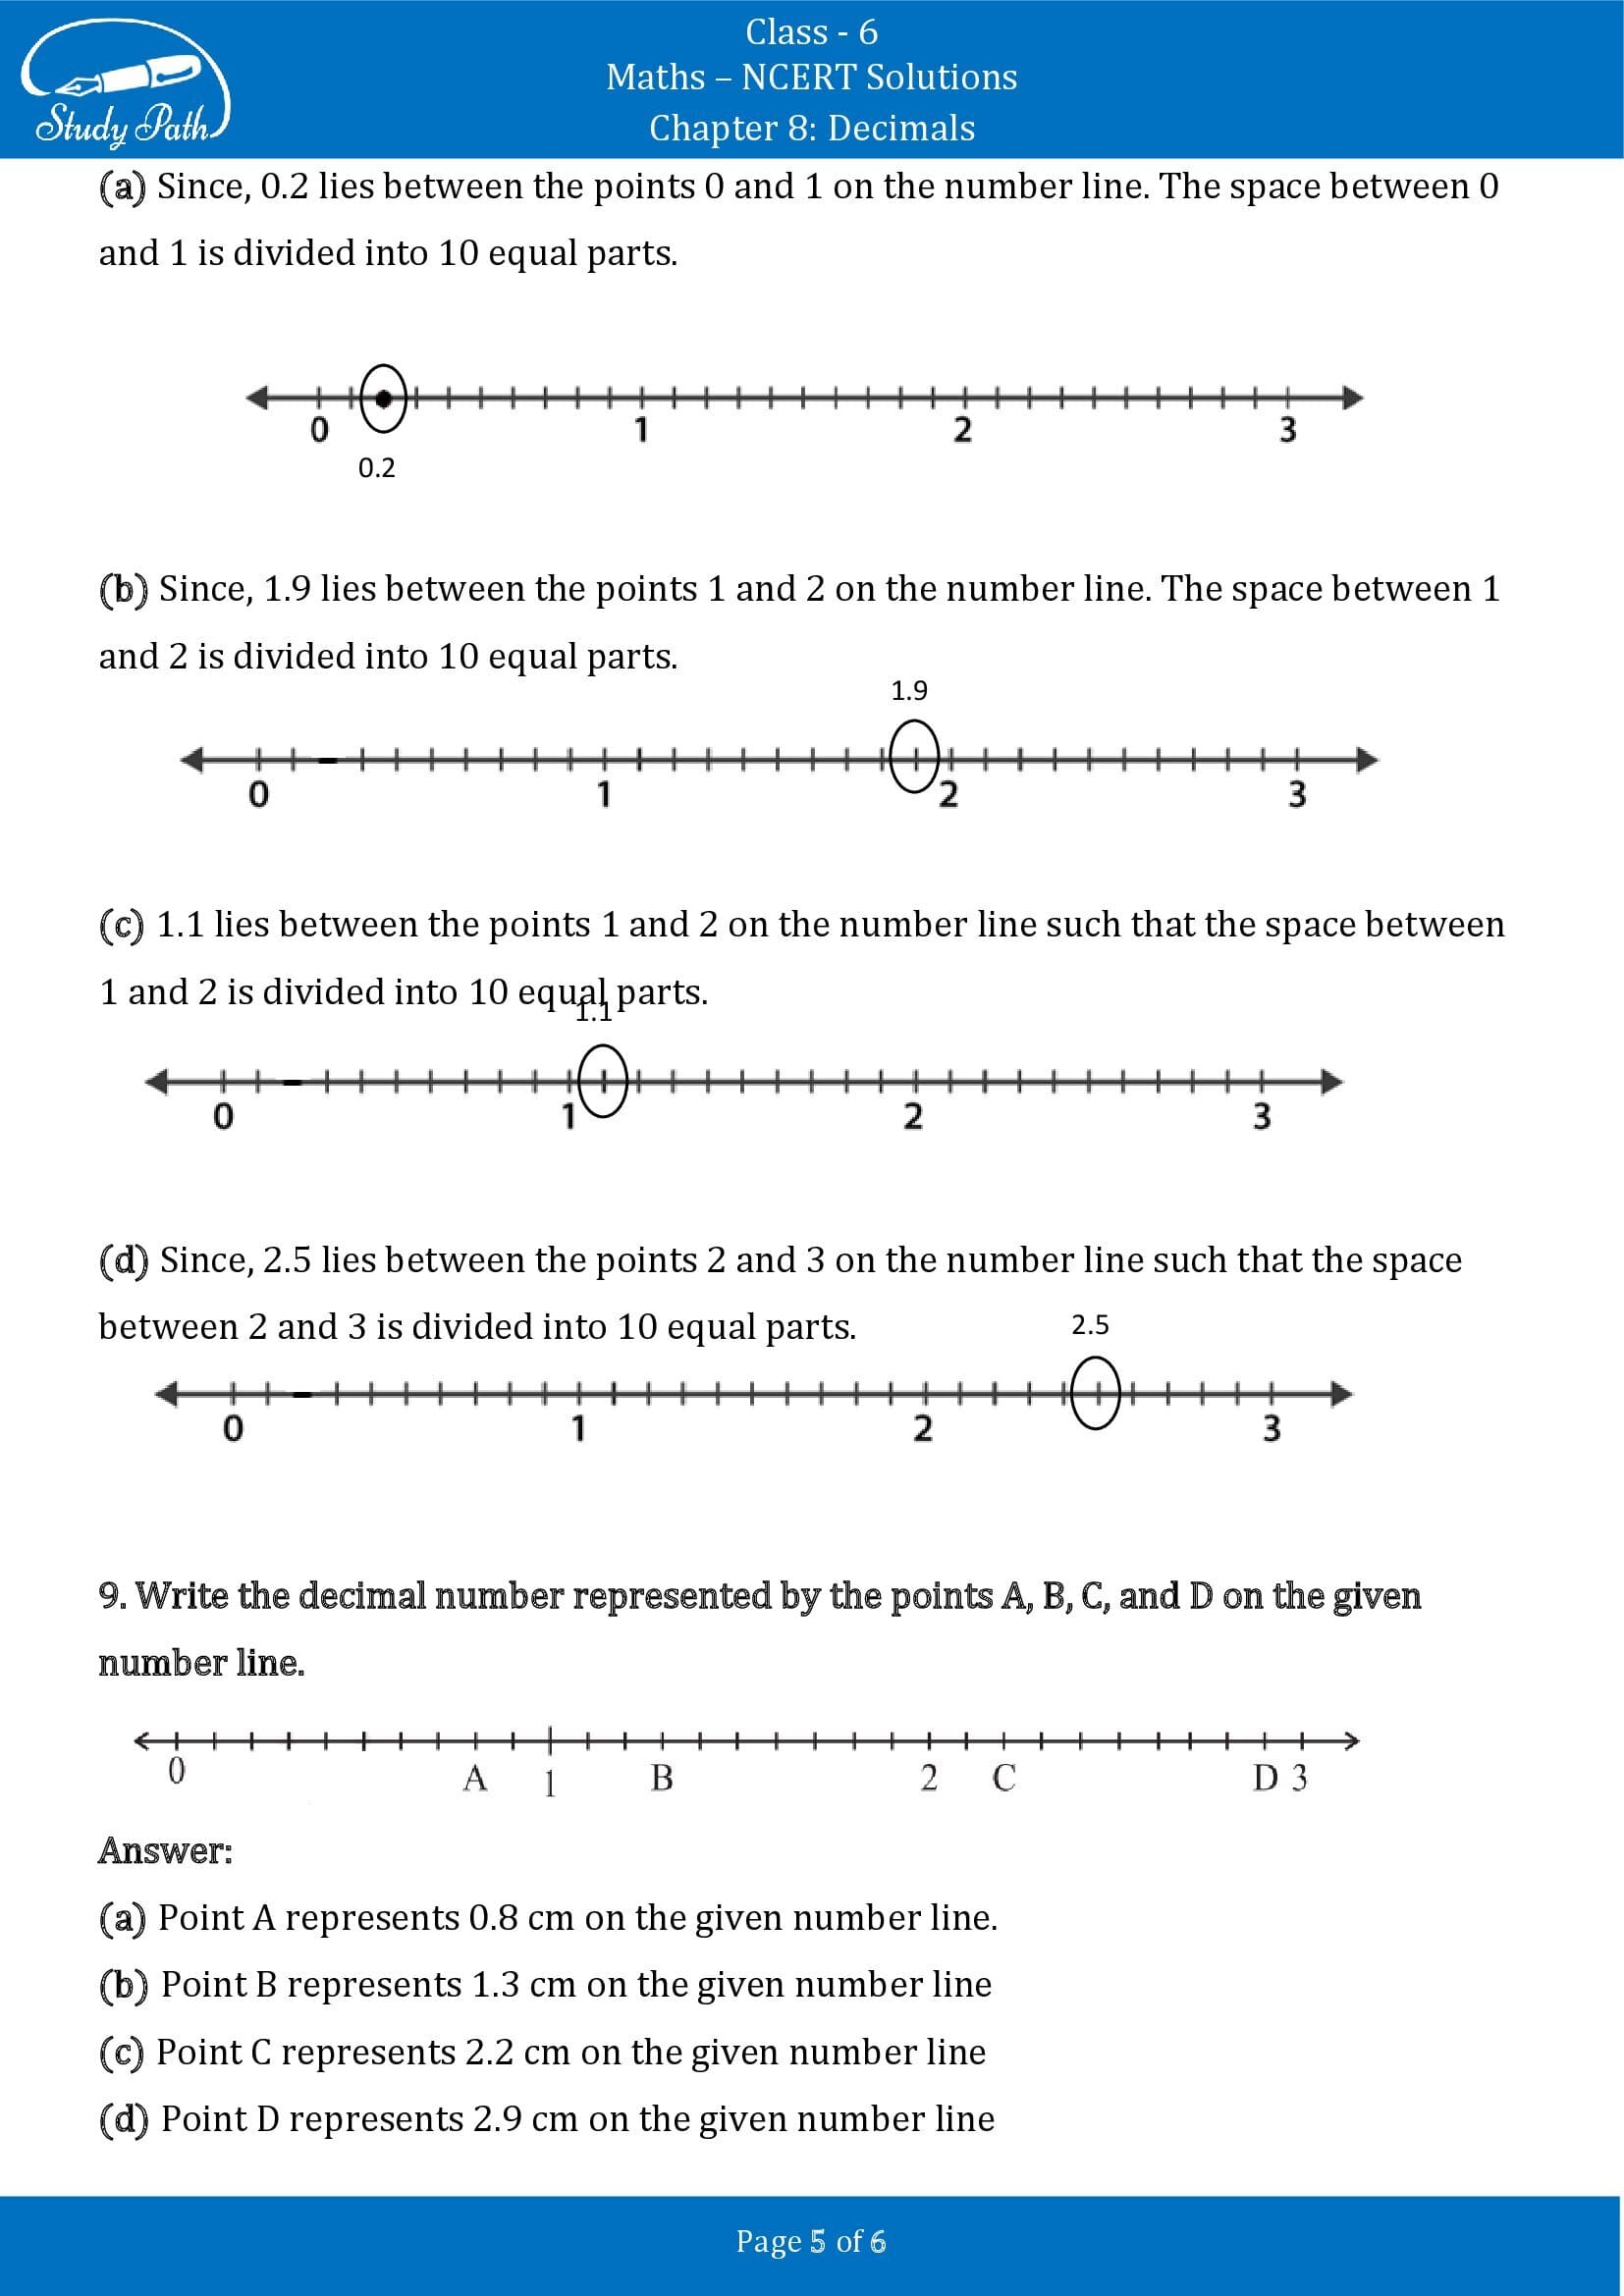 NCERT Solutions for Class 6 Maths Chapter 8 Decimals Exercise 8.1 00005